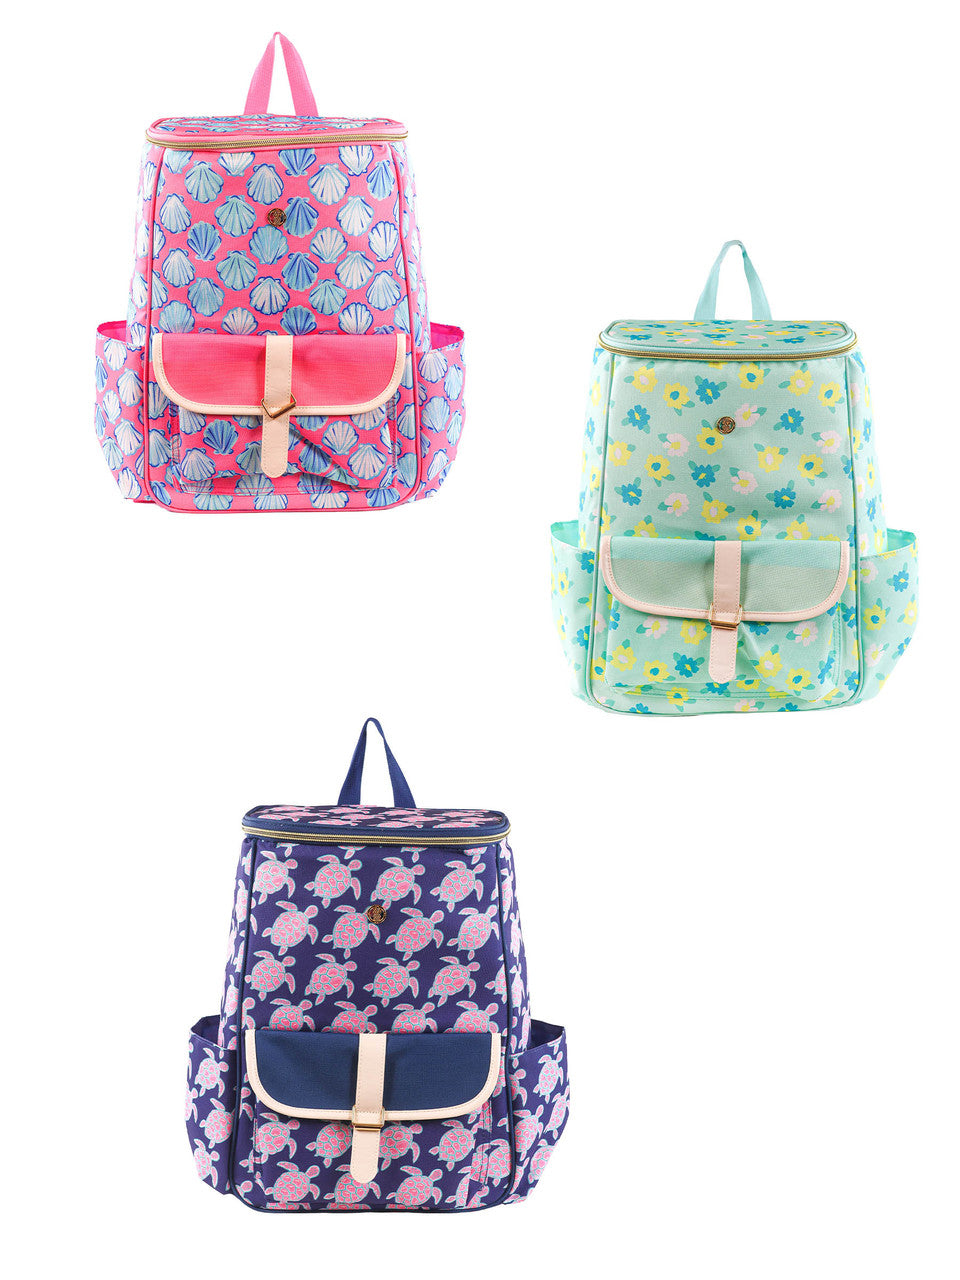 SIMPLY SOUTHERN COOLER BACKPACK - Molly's! A Chic and Unique Boutique 